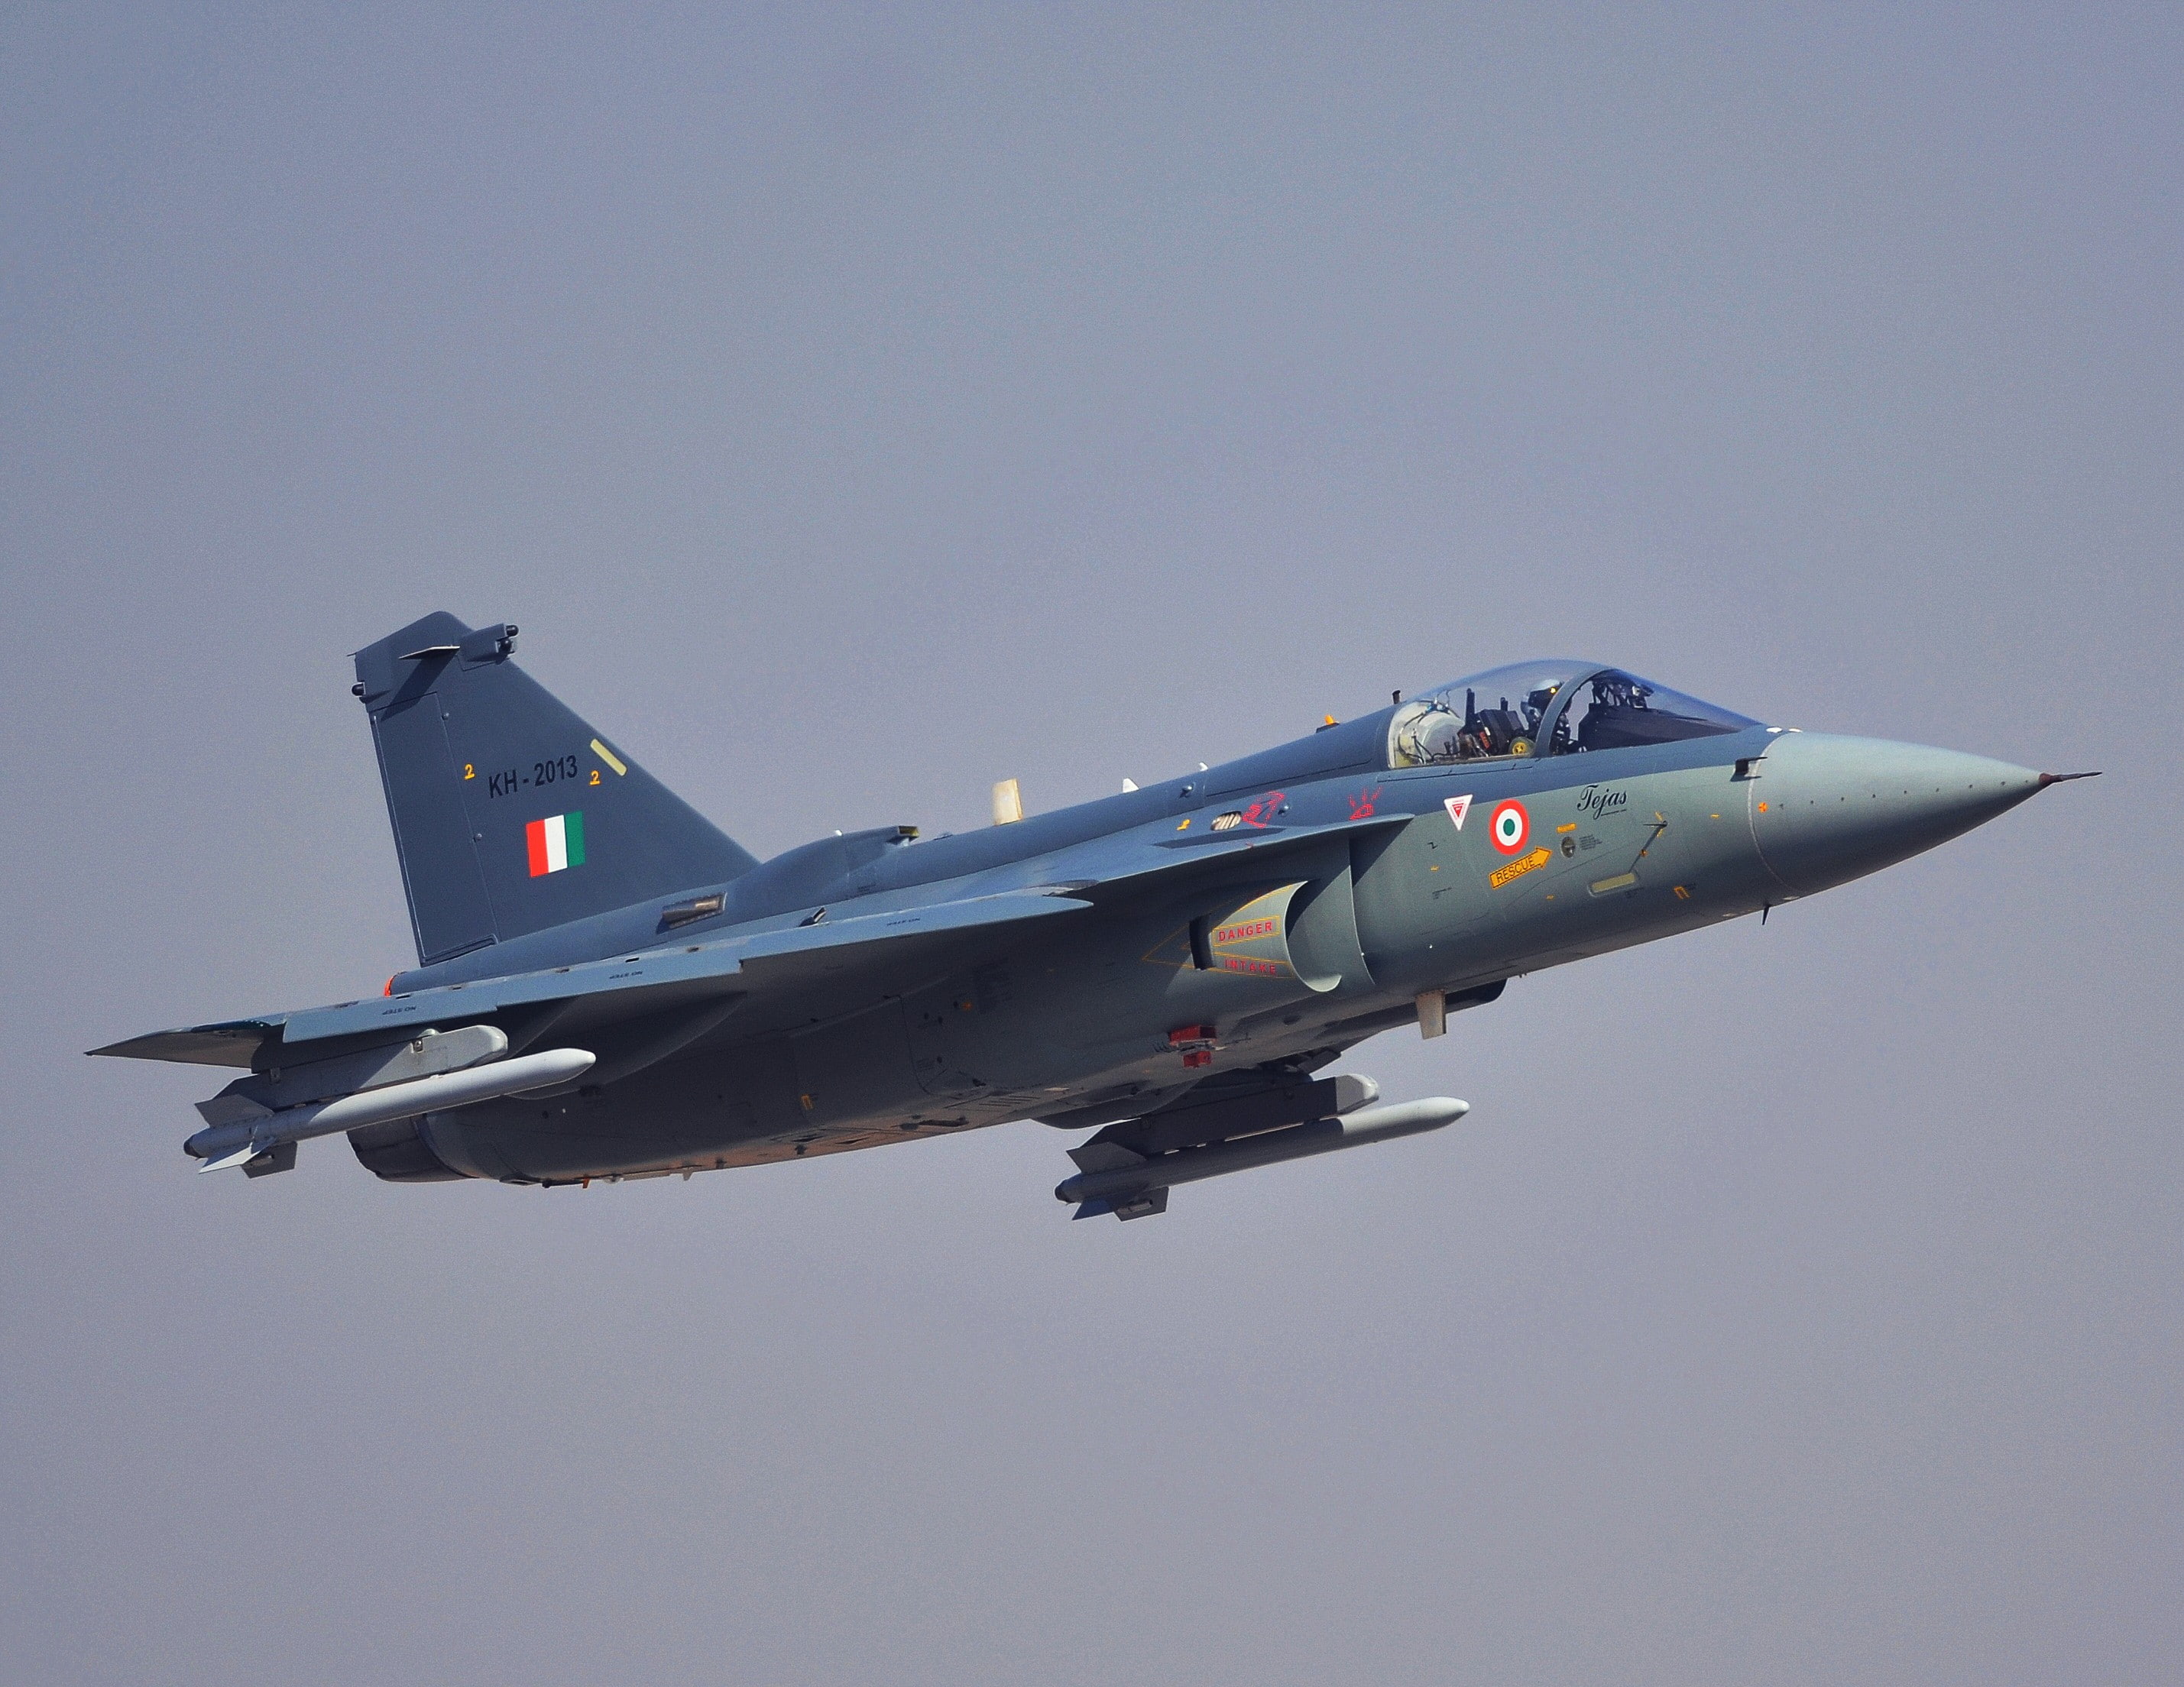 Indian Air Force, LCA Tejas, air vehicle, airplane, mode of transportation